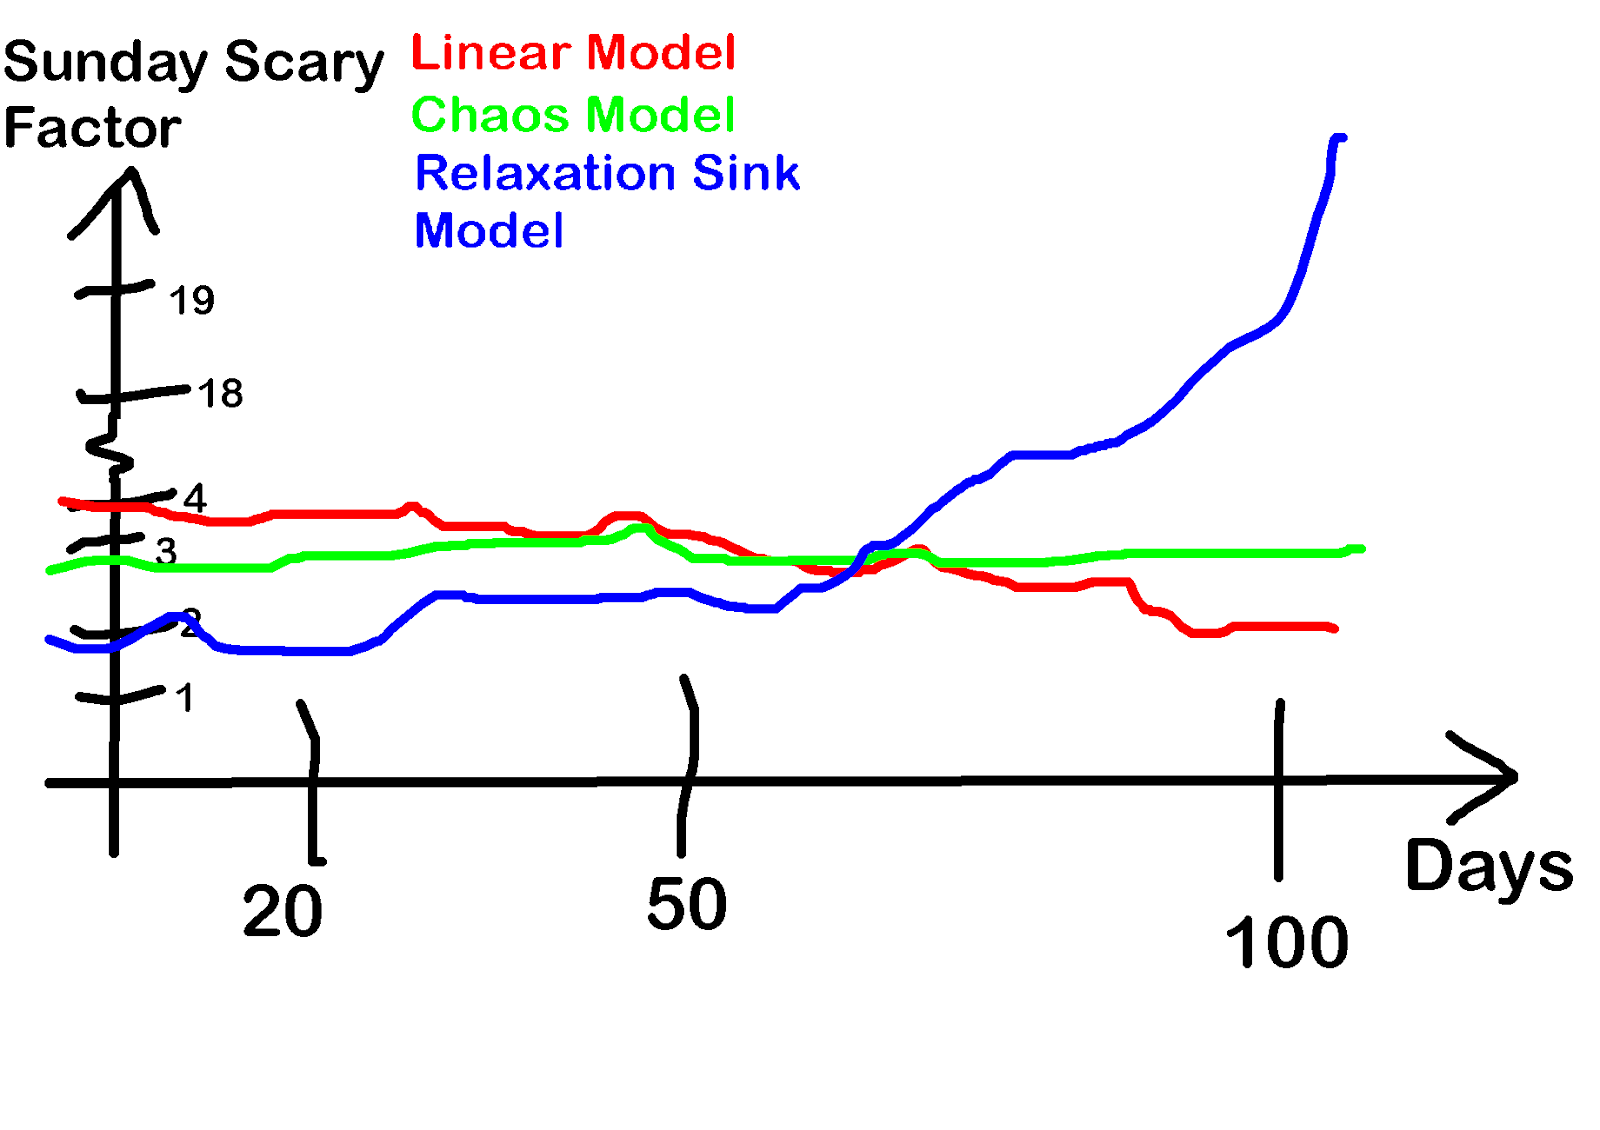 Model Effectiveness in Sunday Scary's